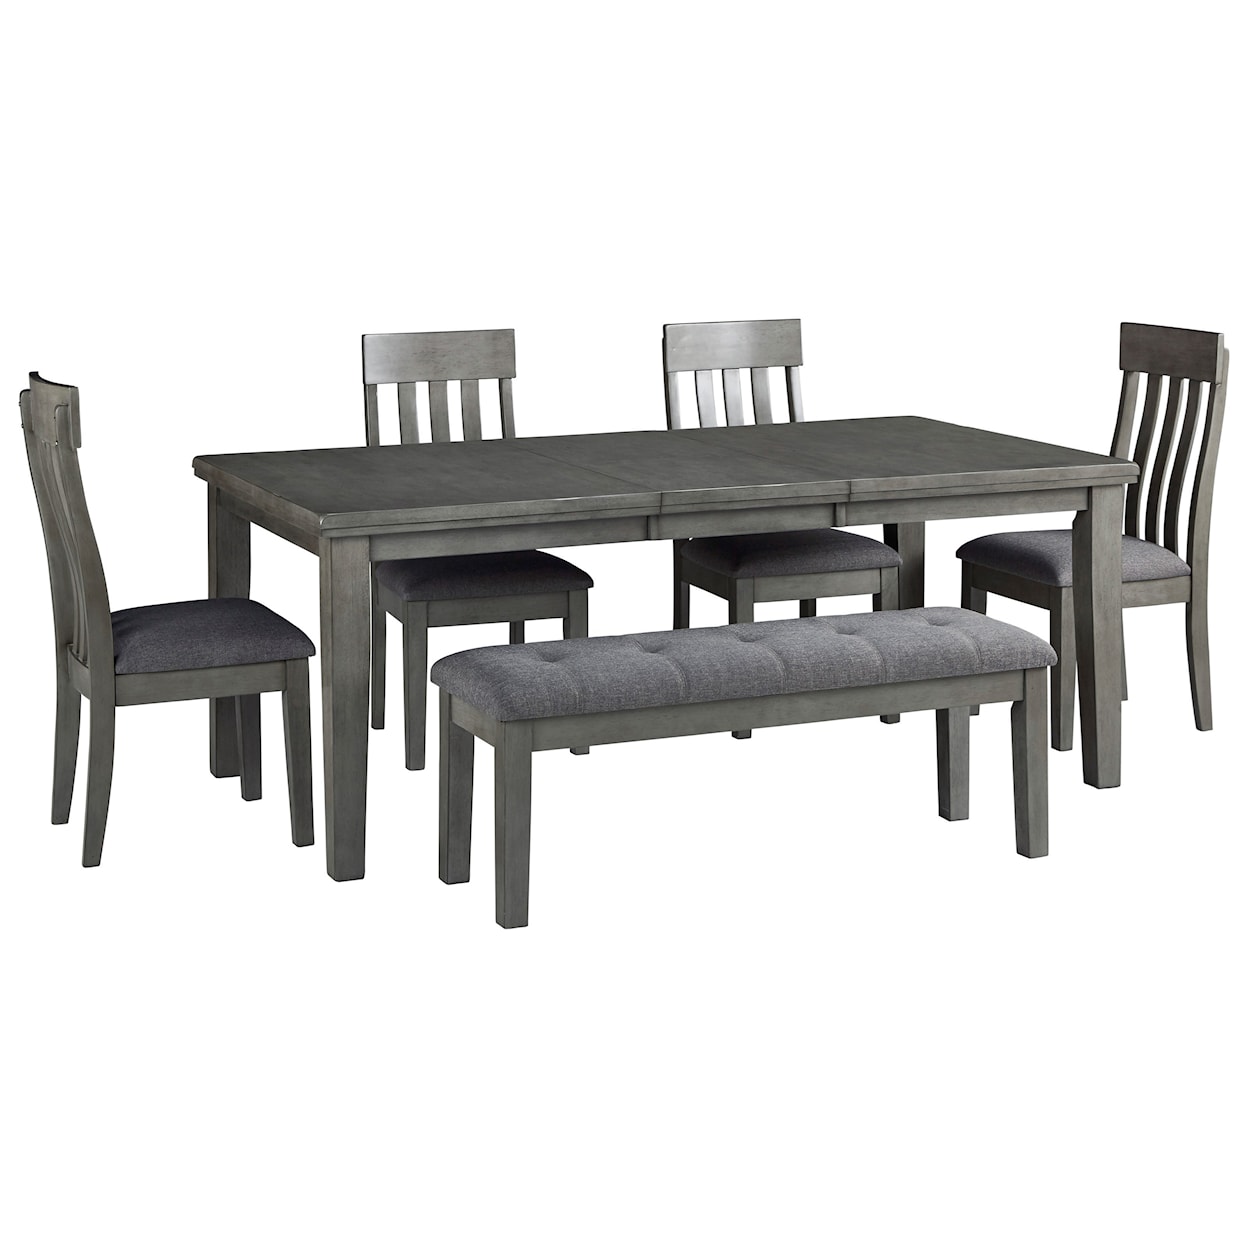 Ashley Furniture Signature Design Hallanden Table & Chair Set with Bench